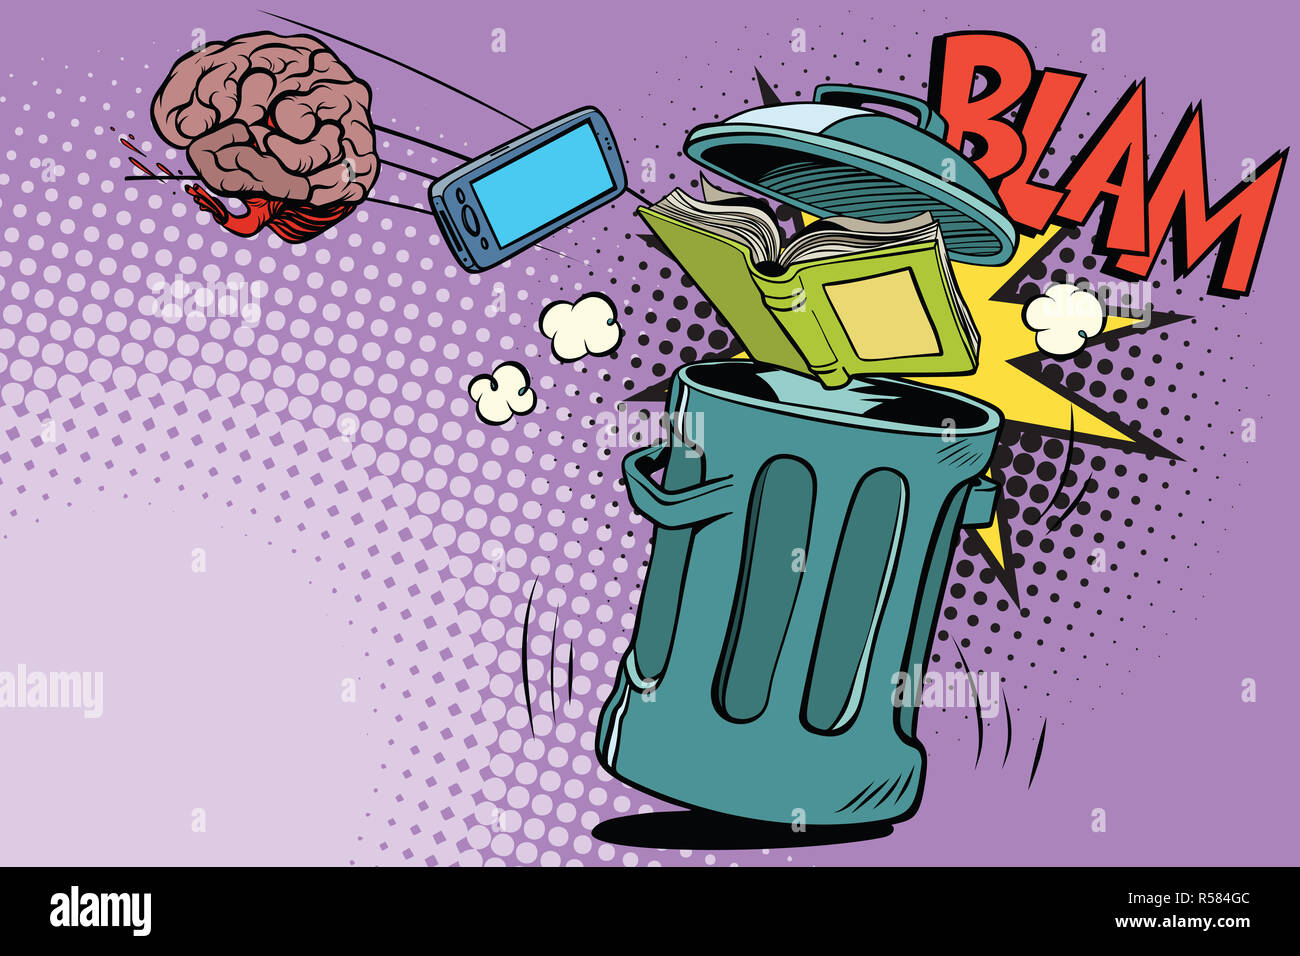 Habi's art and trash dump — @thetoonster and my cursed brains